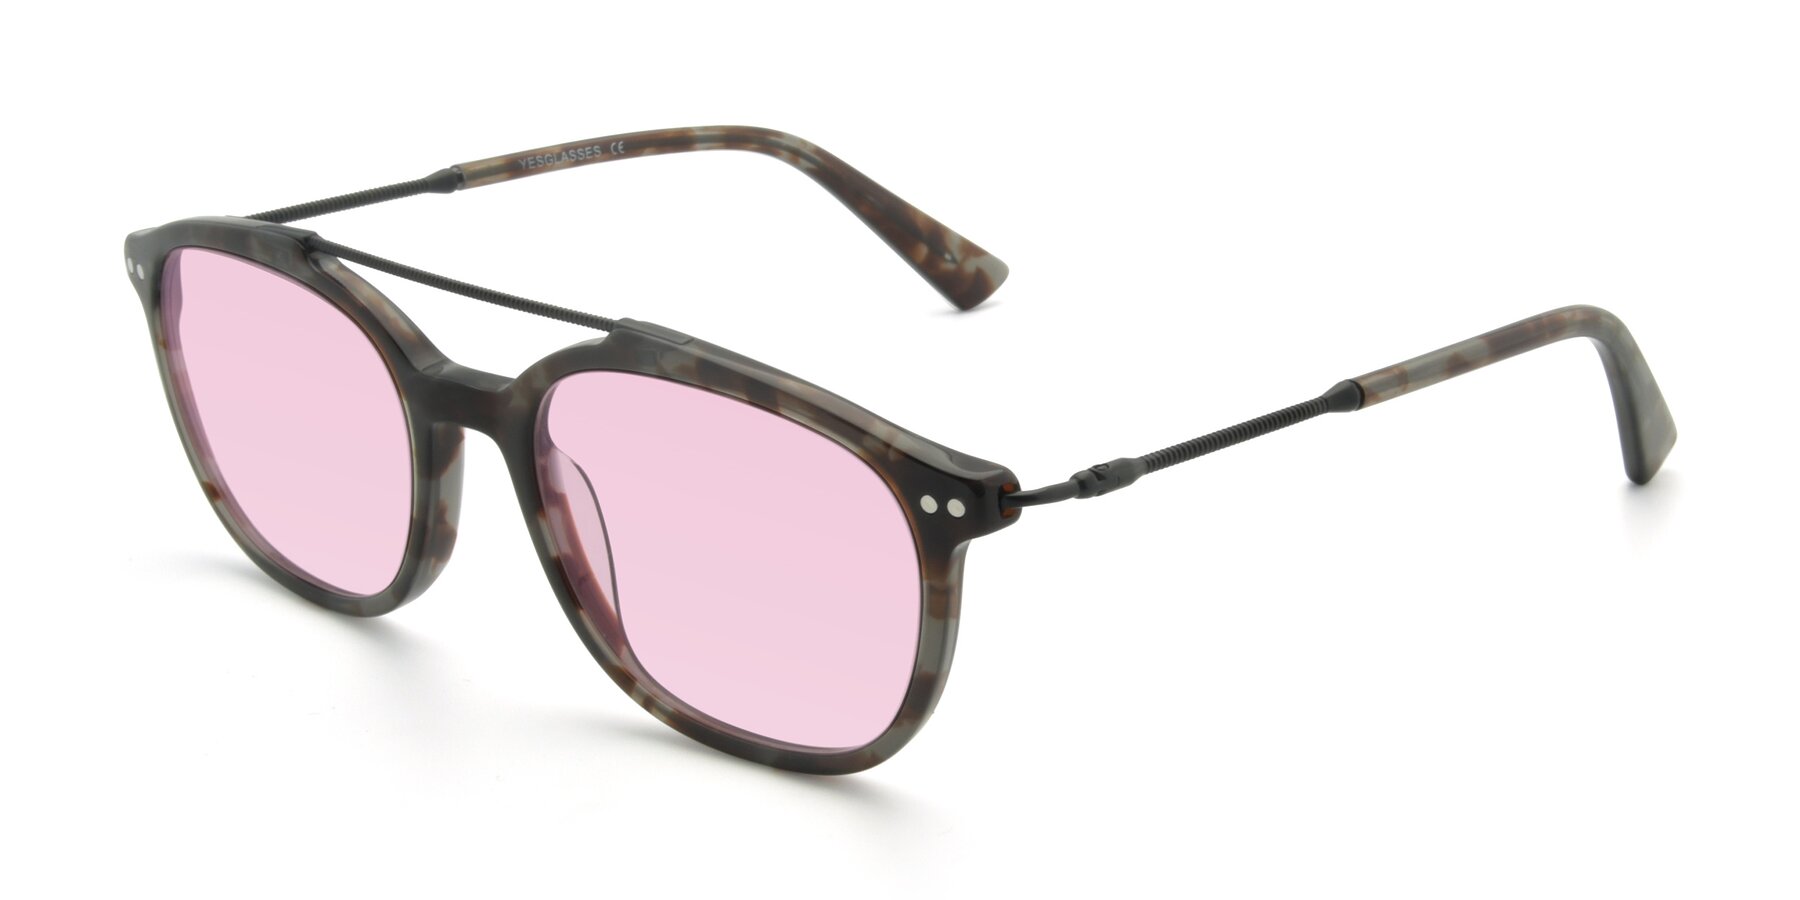 Angle of 17150 in Tortoise Navy with Light Pink Tinted Lenses